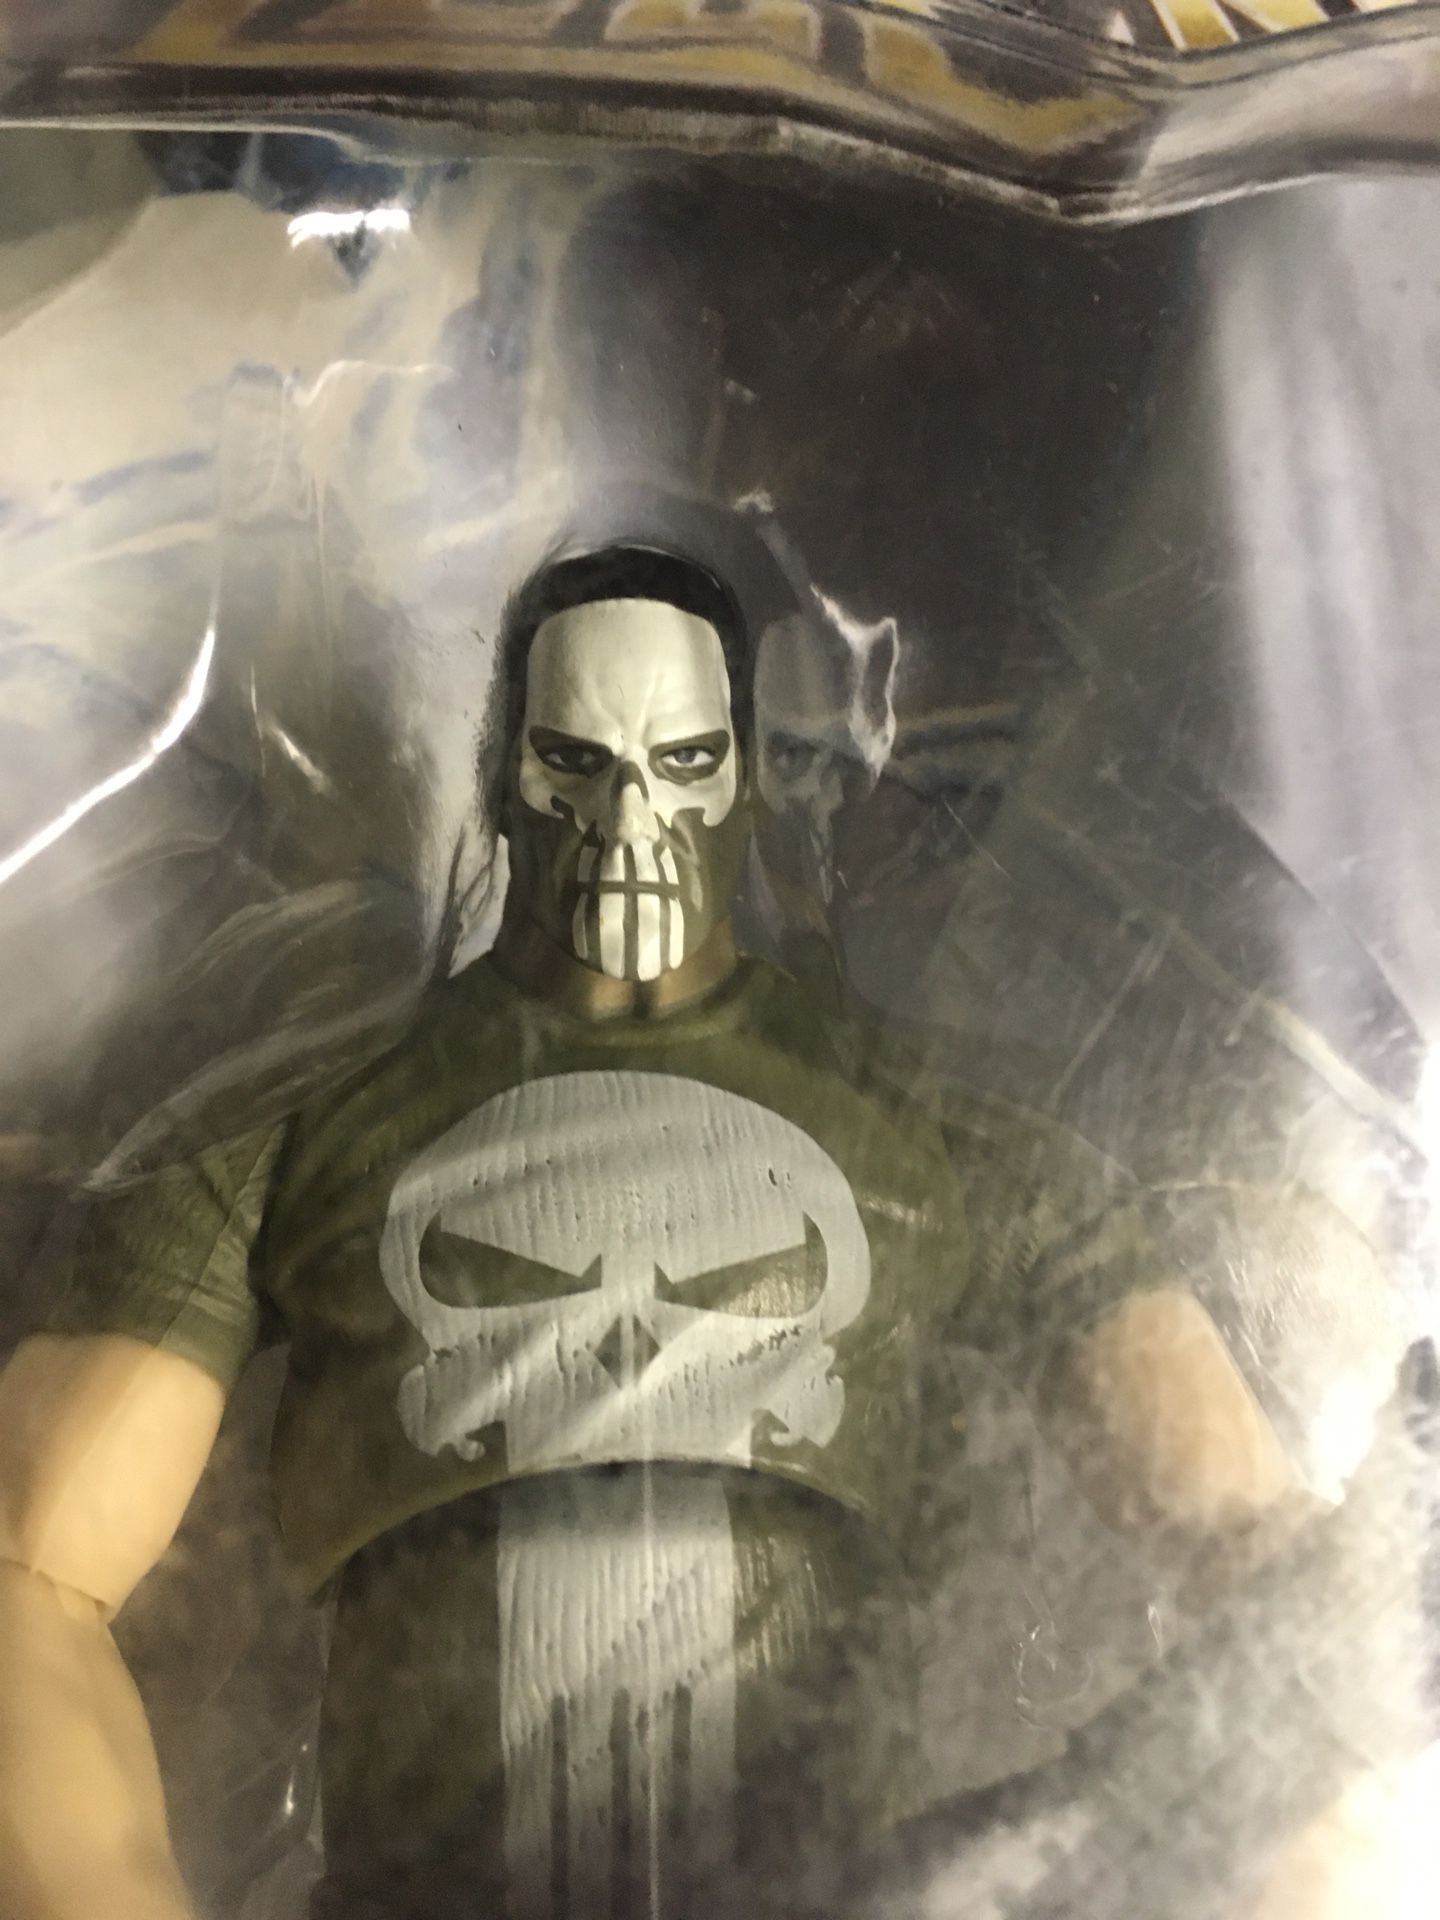 Marvel Legends Punisher Variant Walmart Exclusive Action Figure Toy Collectabile